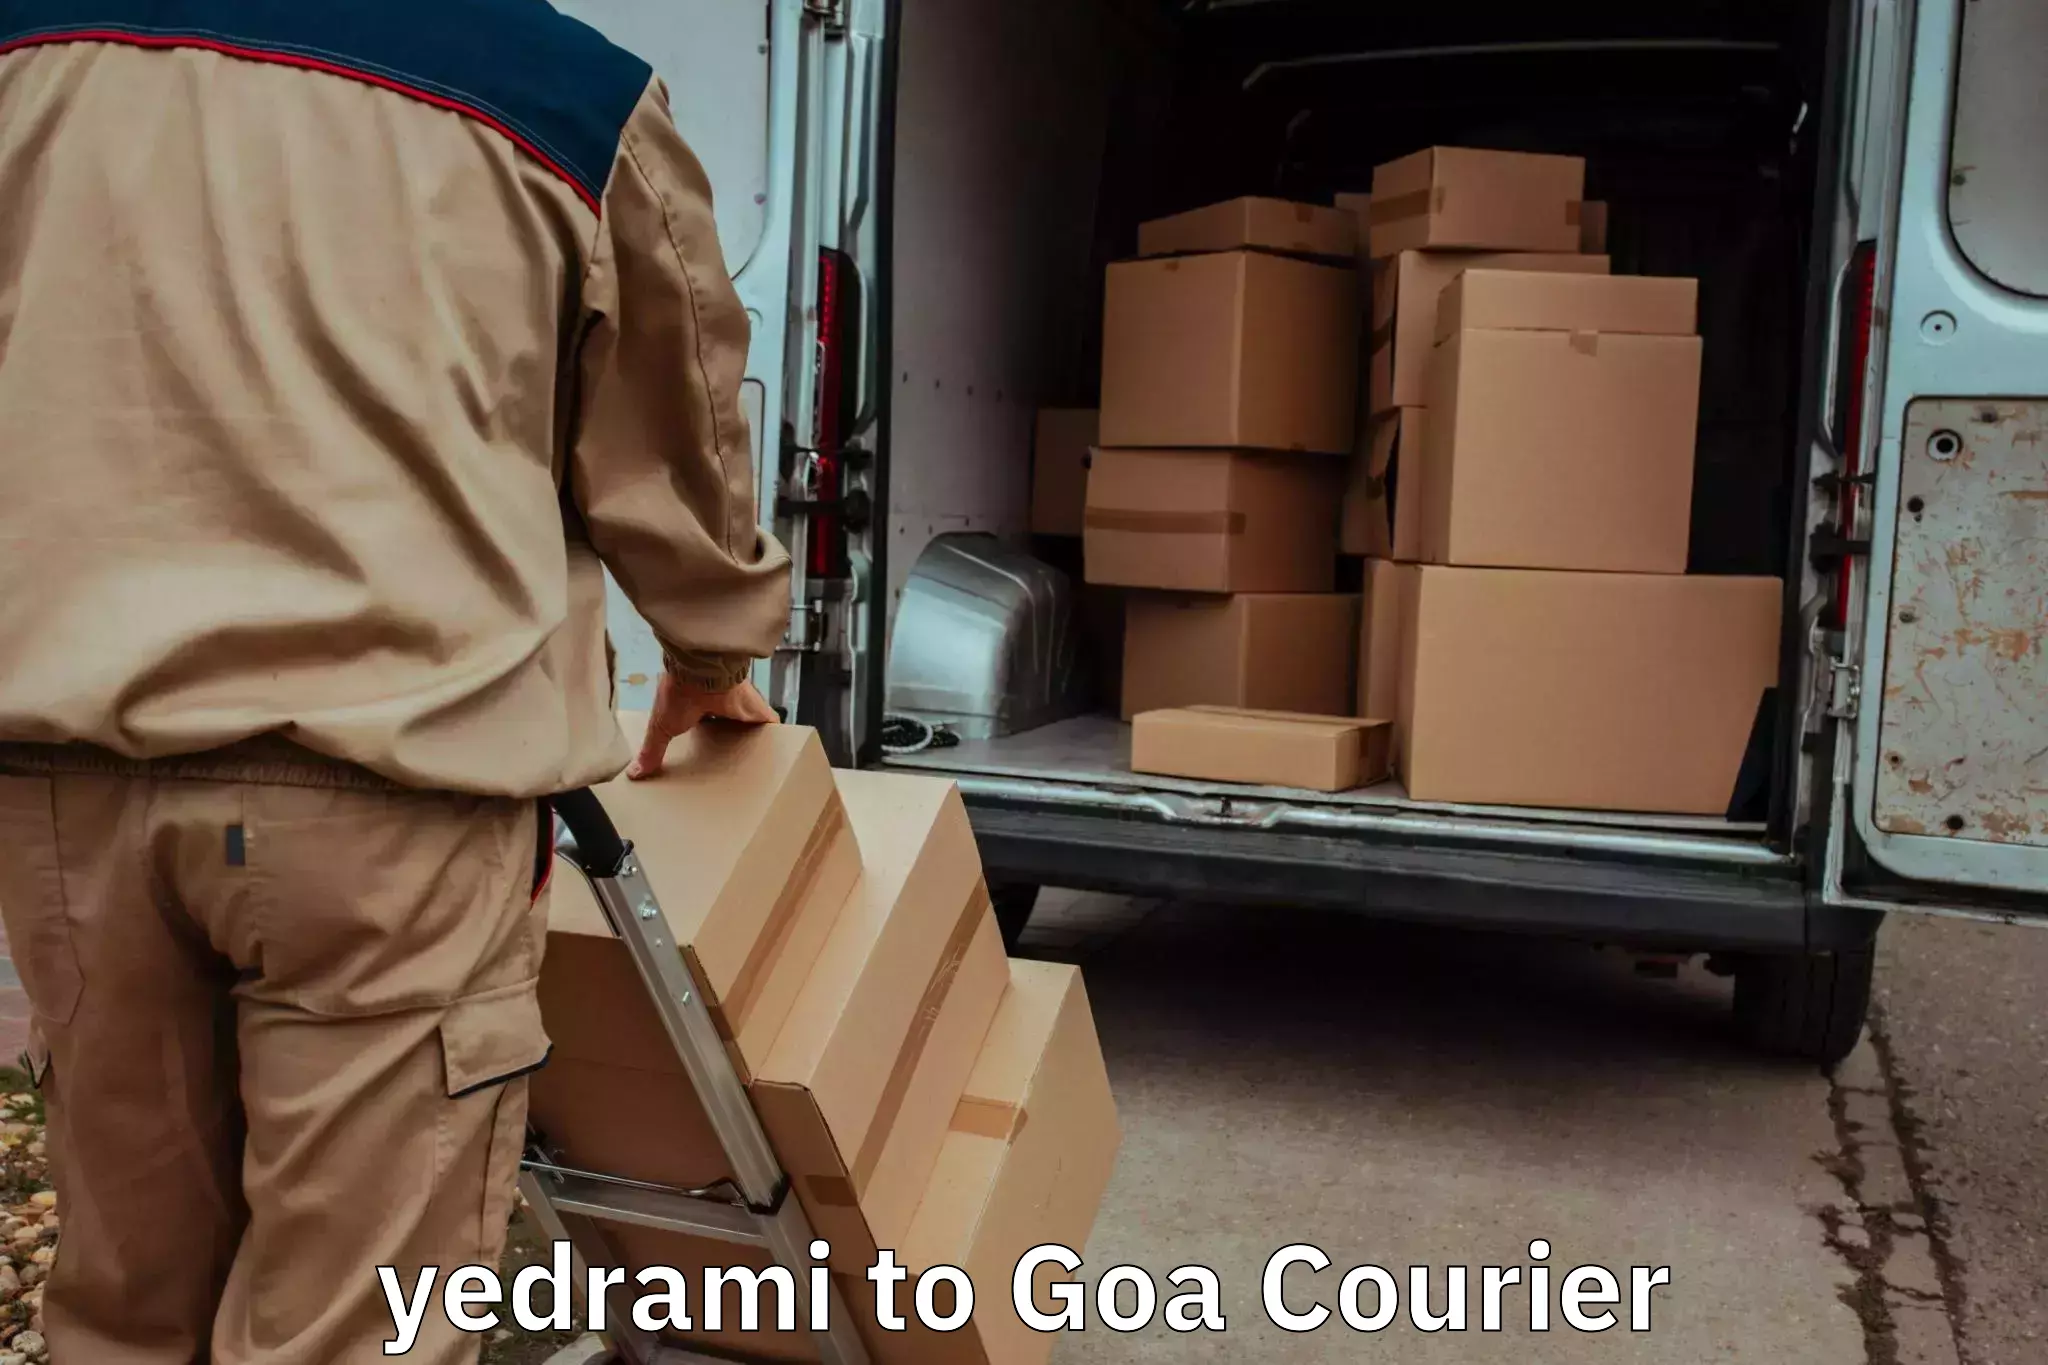 Trusted relocation services yedrami to Goa